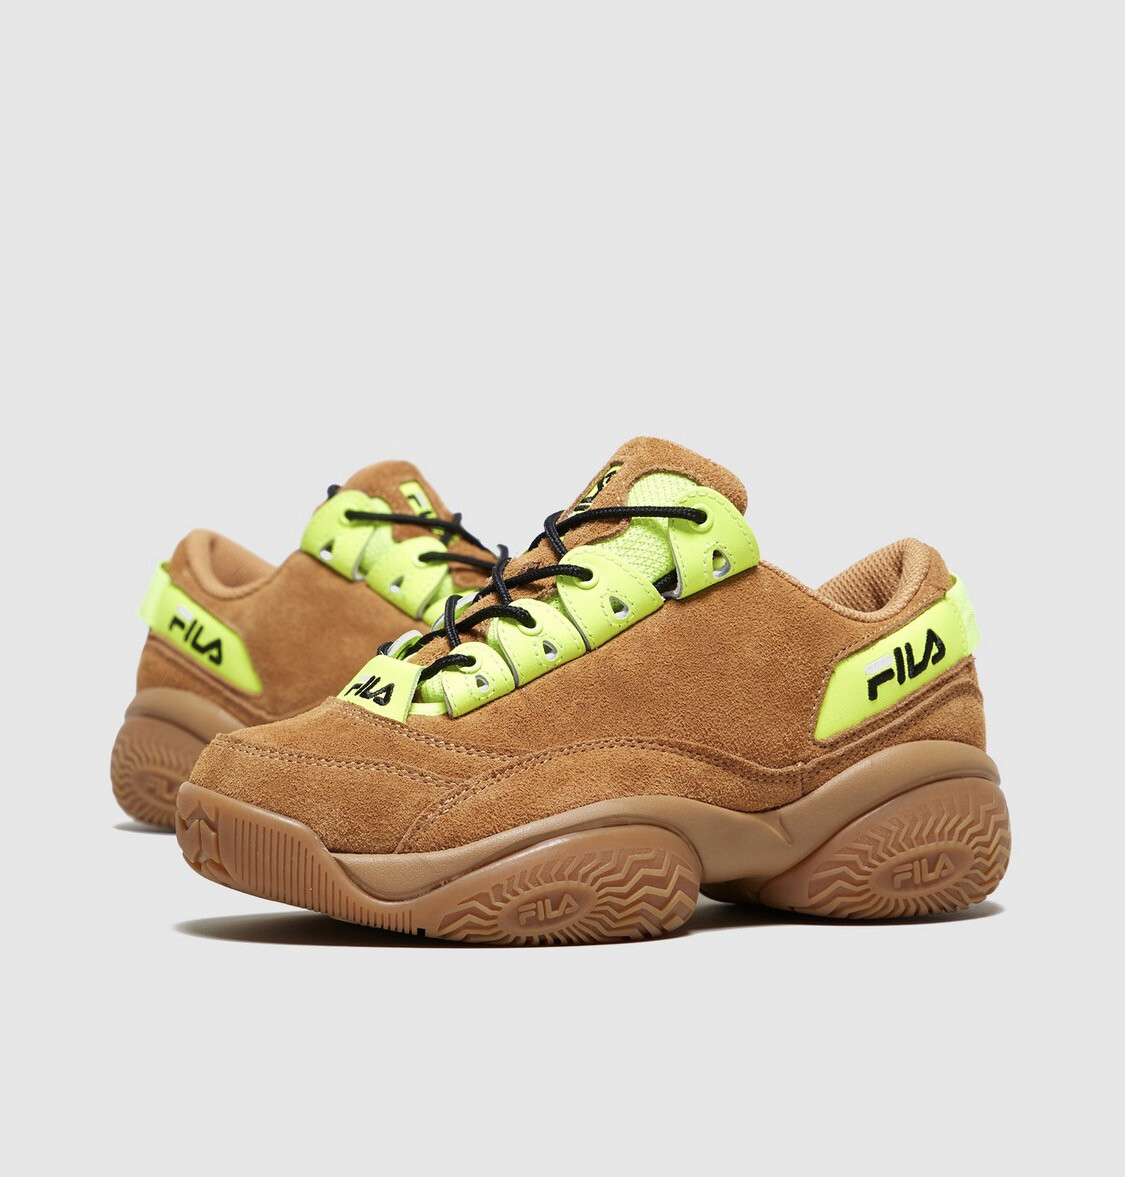 Limited Edition Tan FILA Suede Provenance